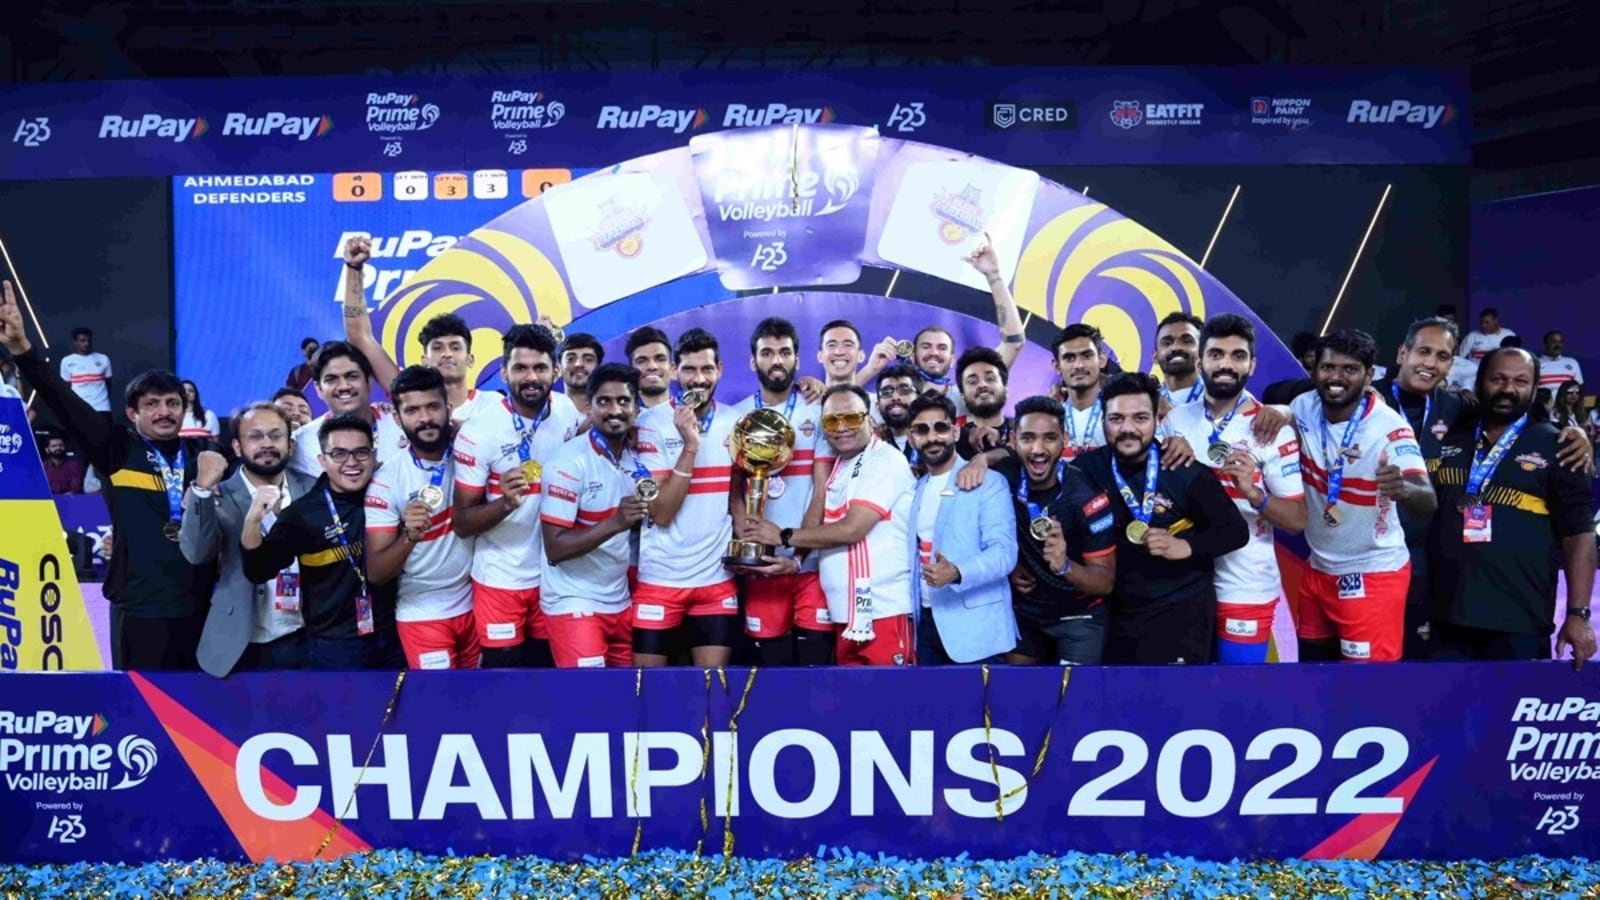 Volleyball World to stream RuPay Prime Volleyball League globally